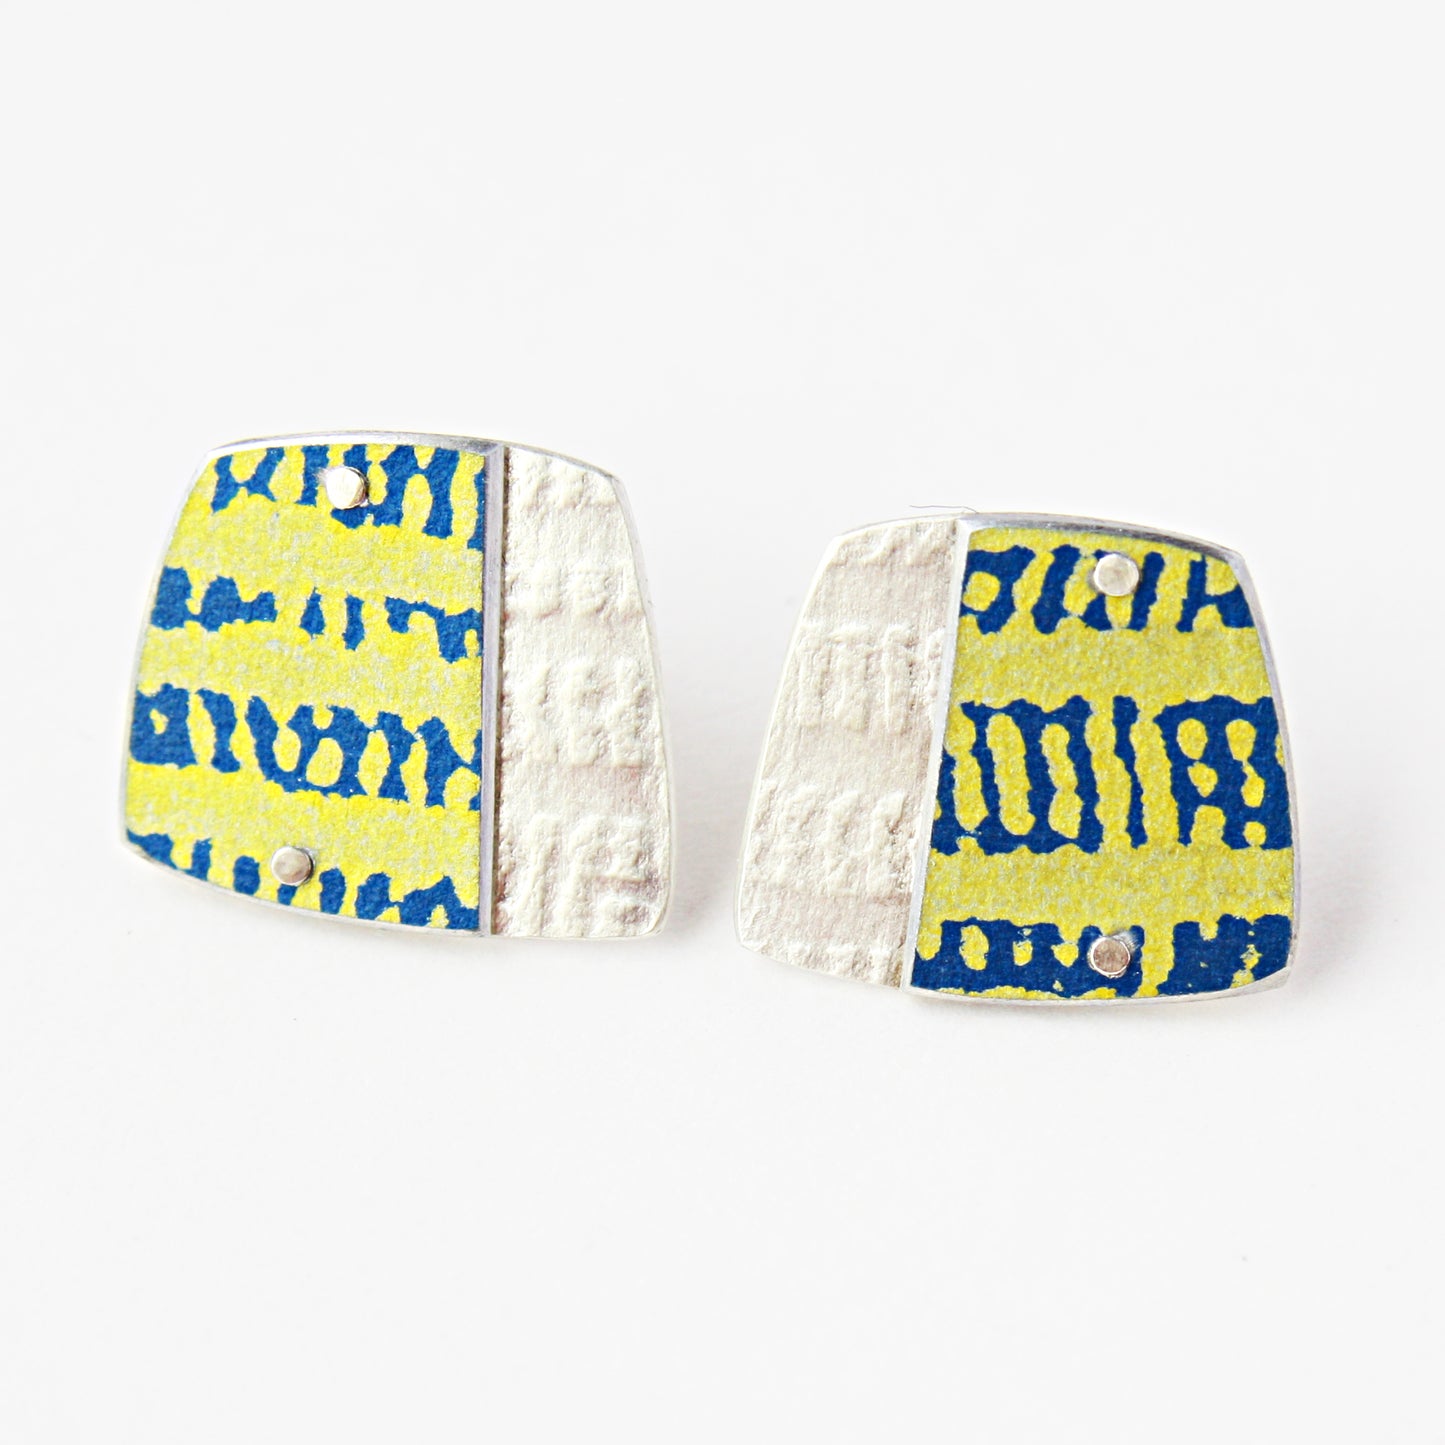 SL31 Yellow/blue on silver square Trax stud earrings